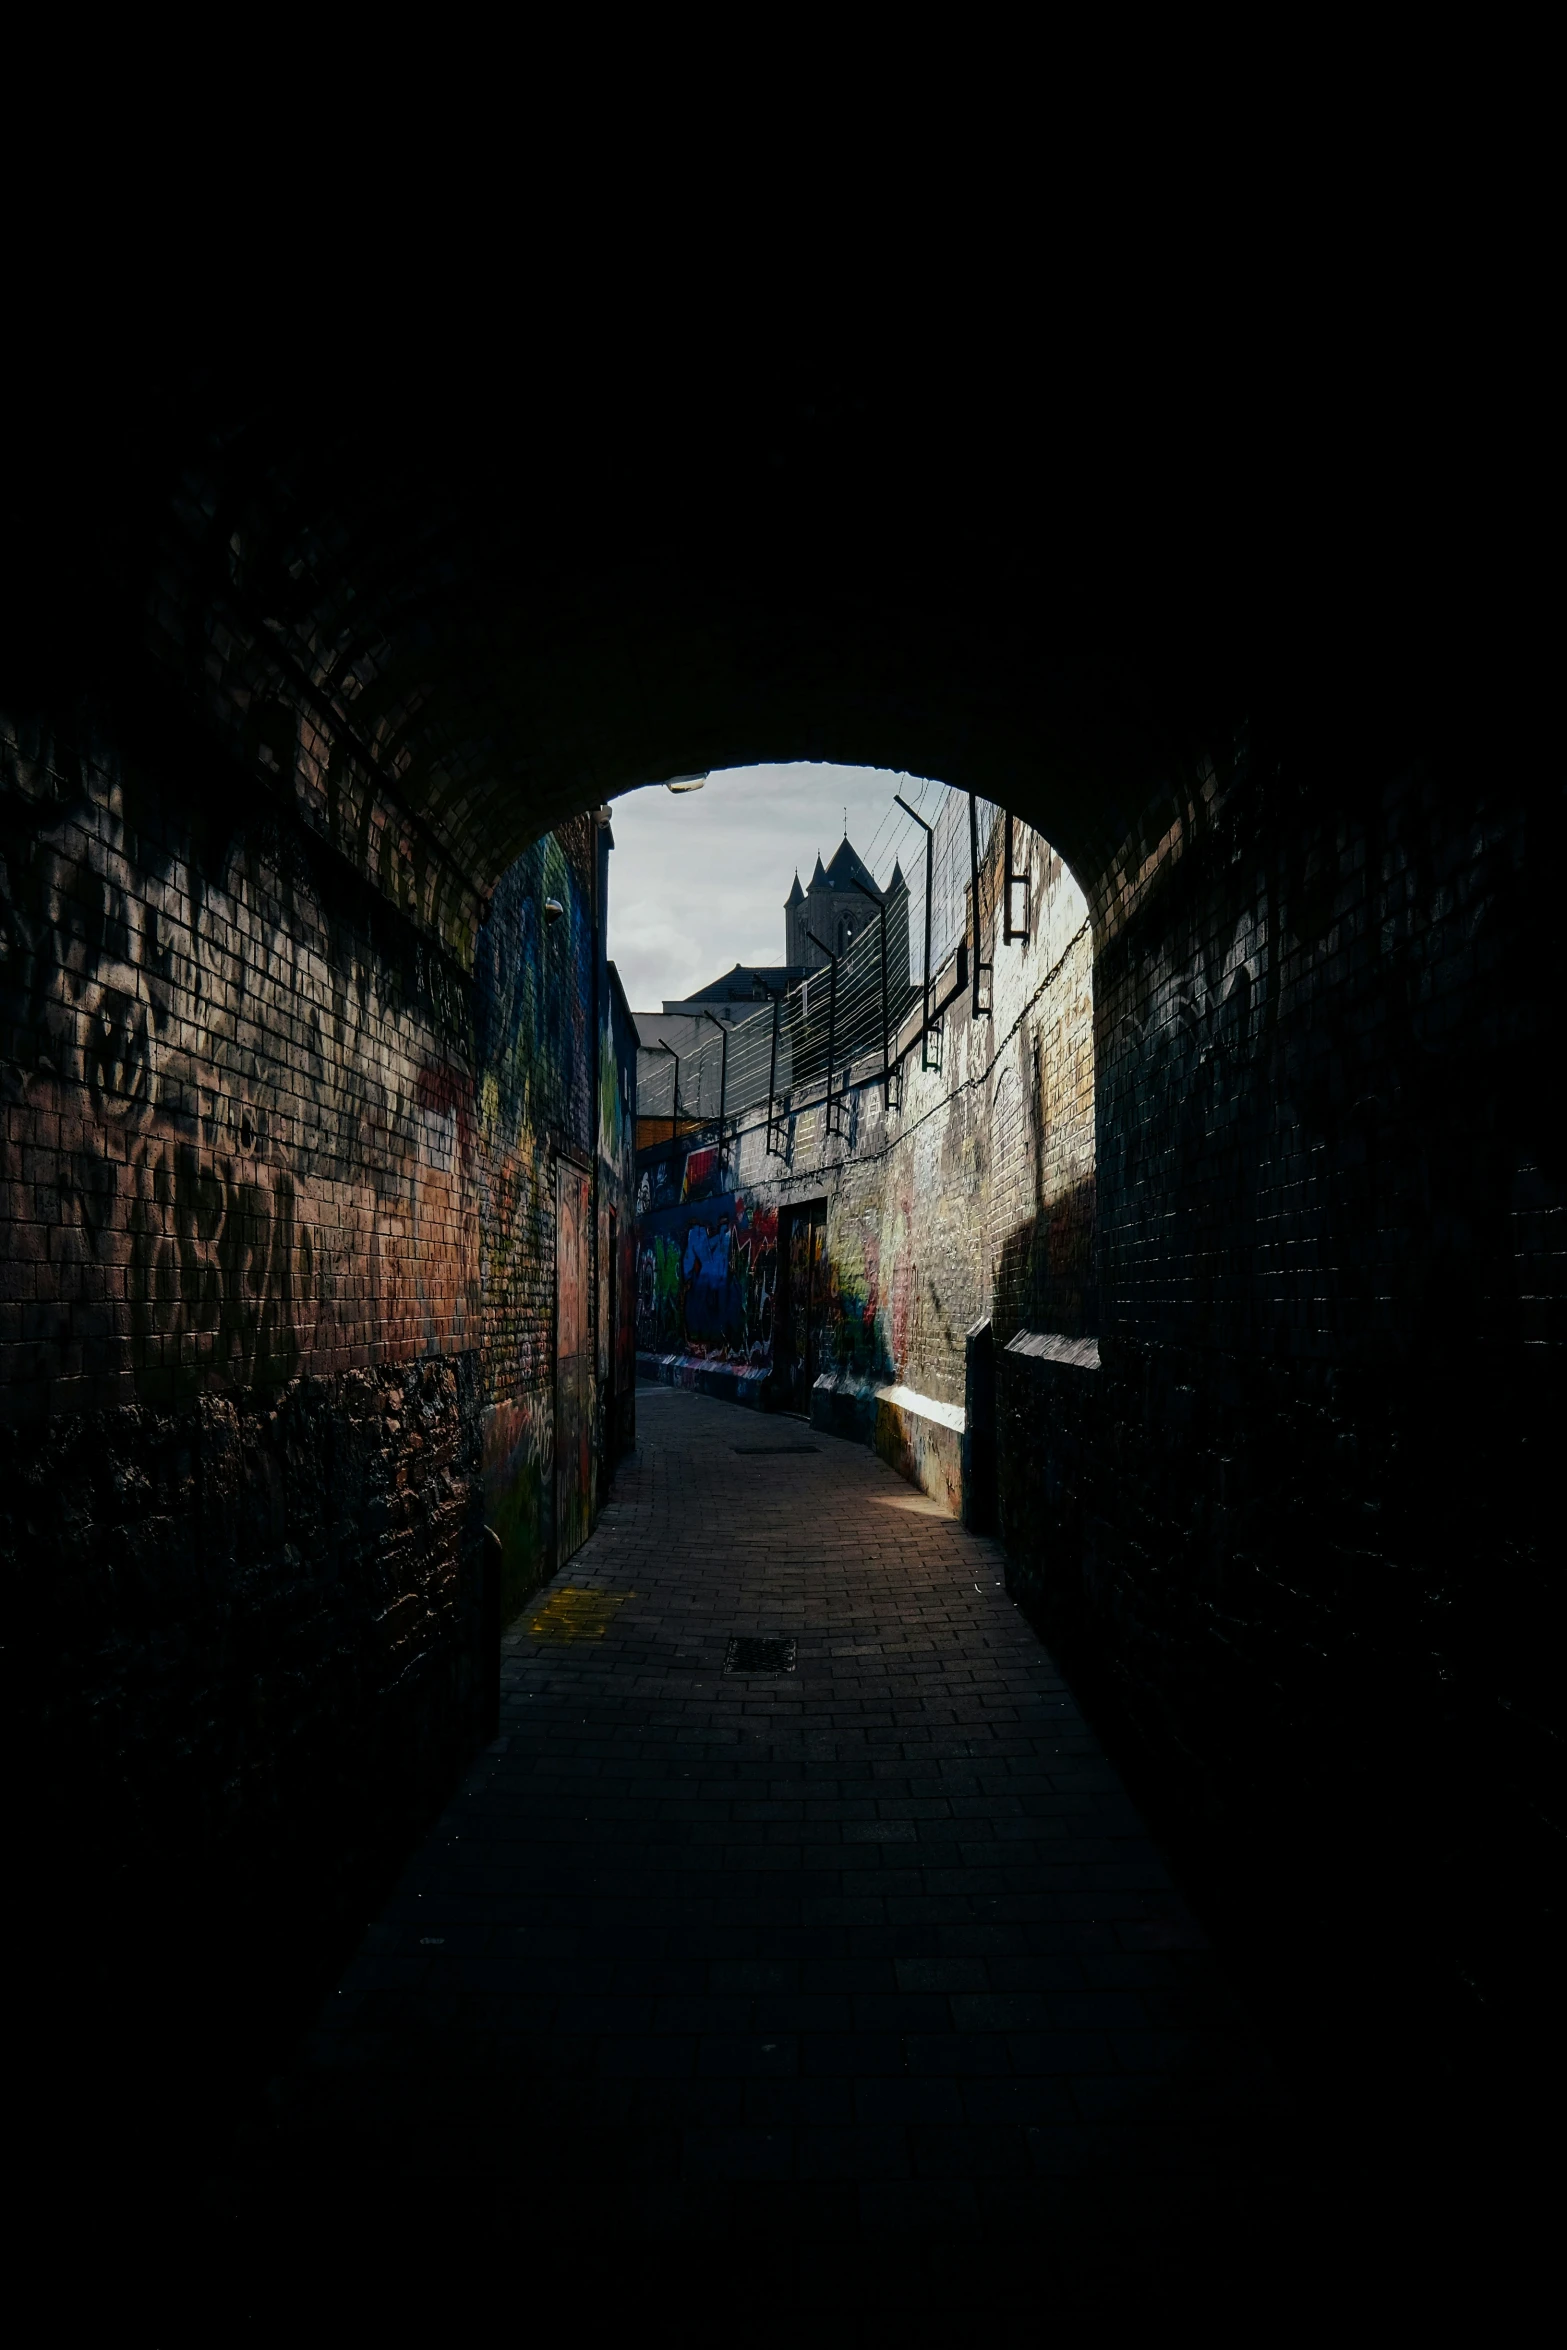 dark alleyway in a city with no people in it